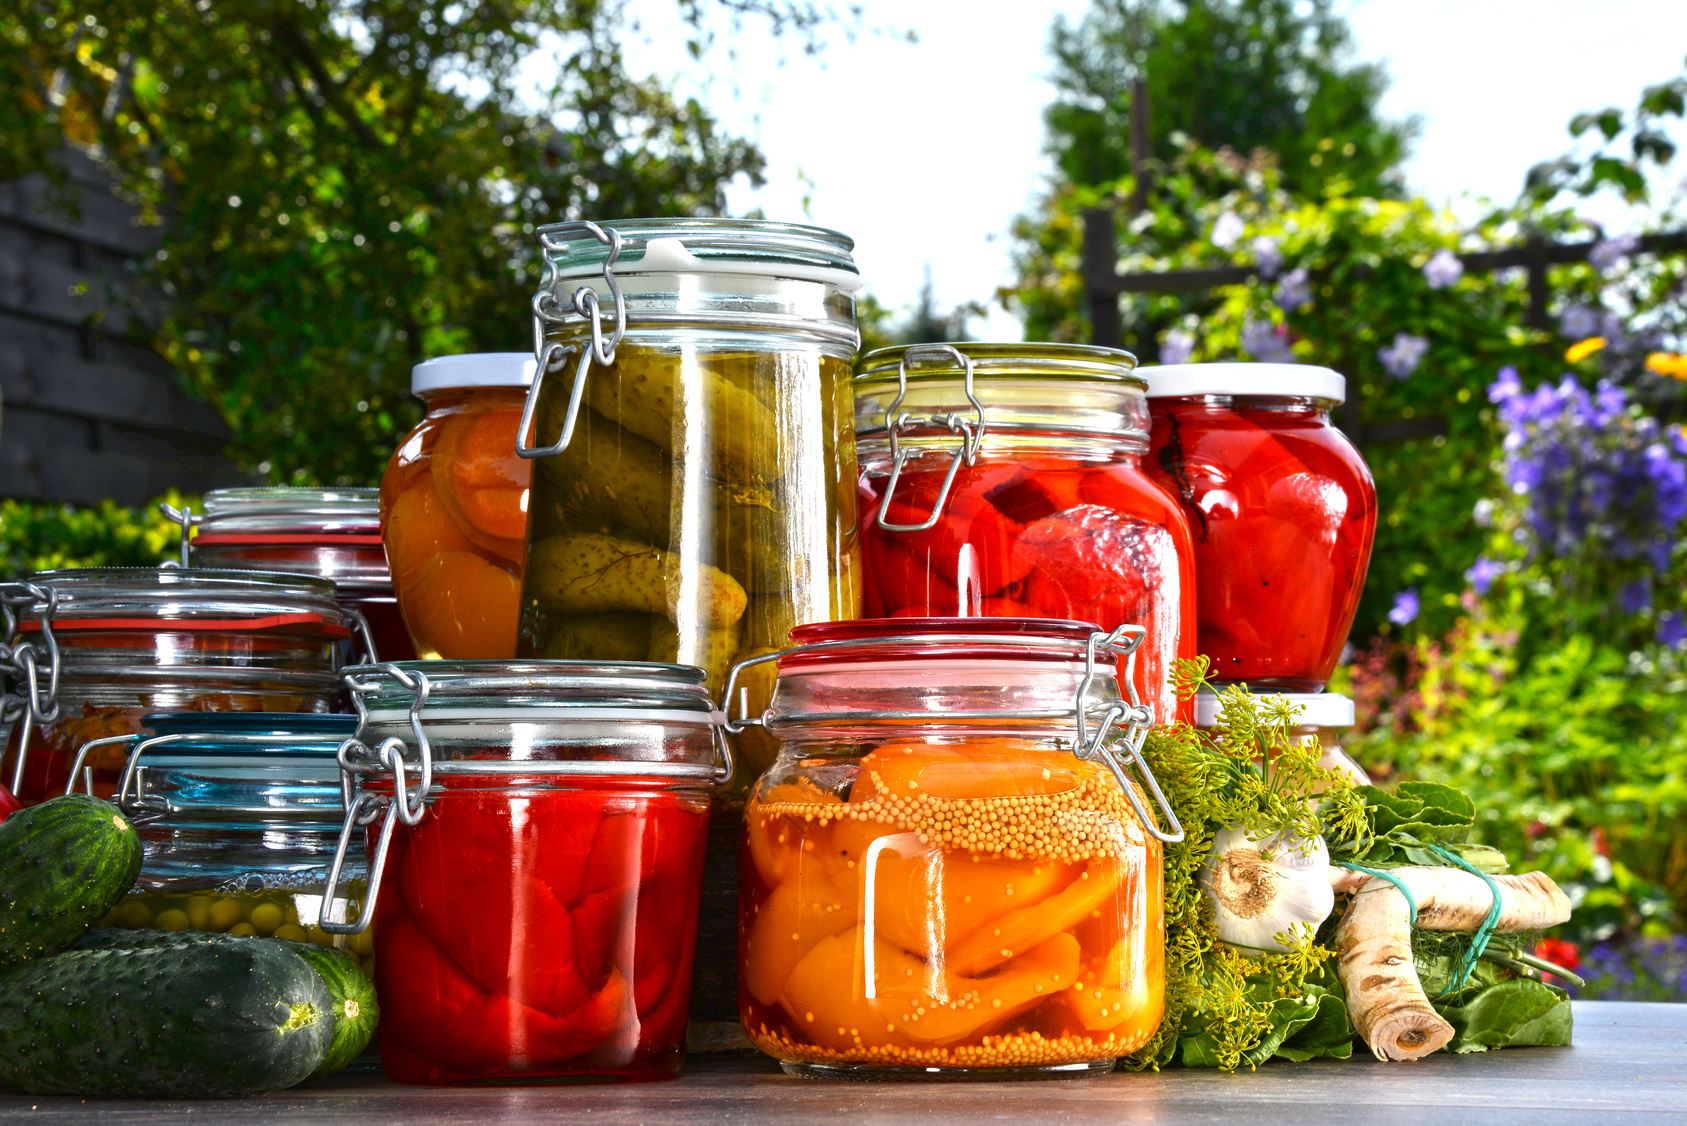 Jars of pickled vegetables and fruits in the garden